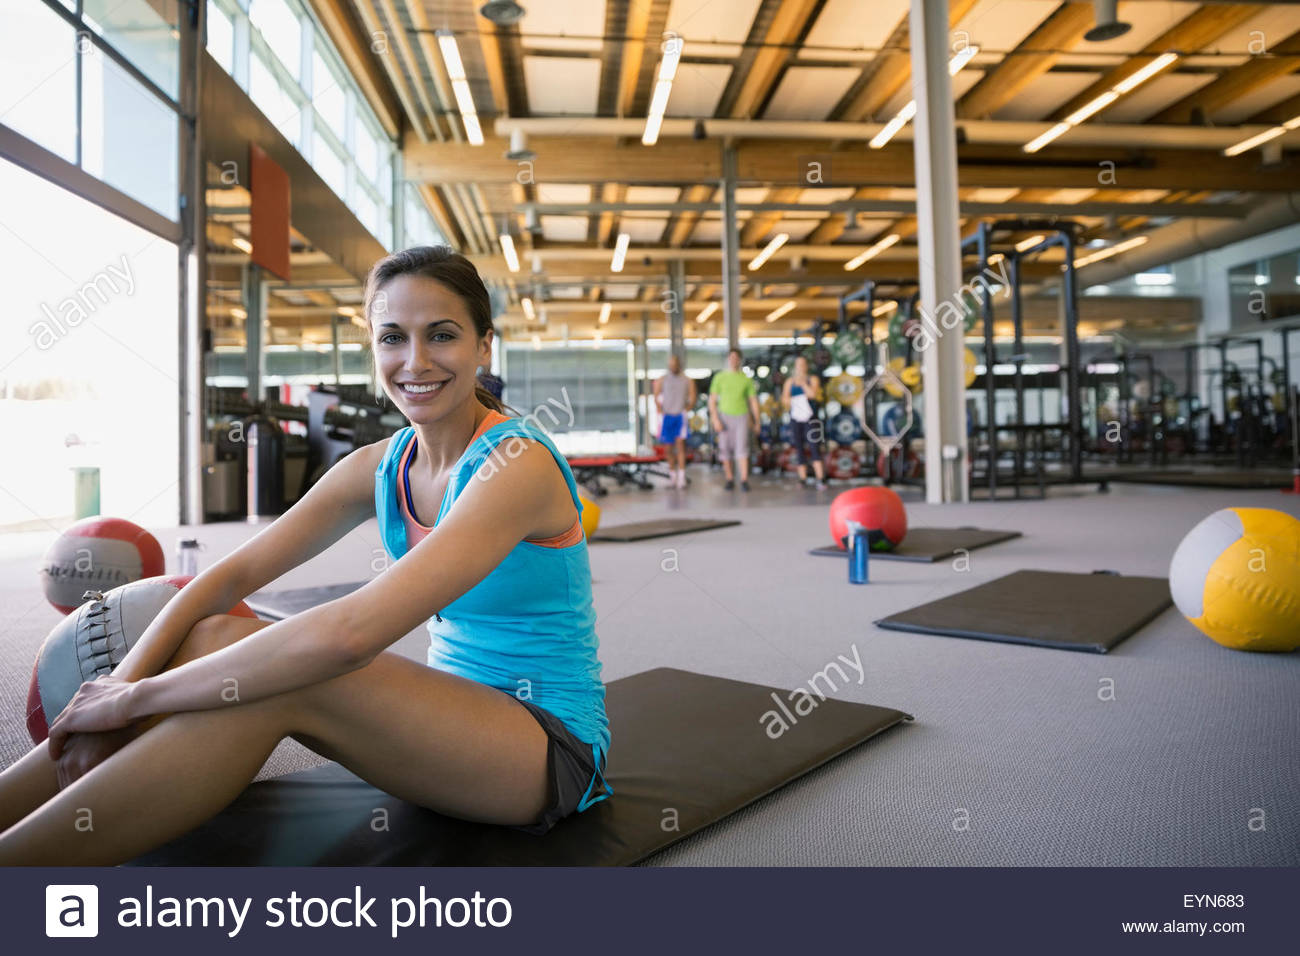 Portrait smiling woman on exercise mat in gym Stock Photo